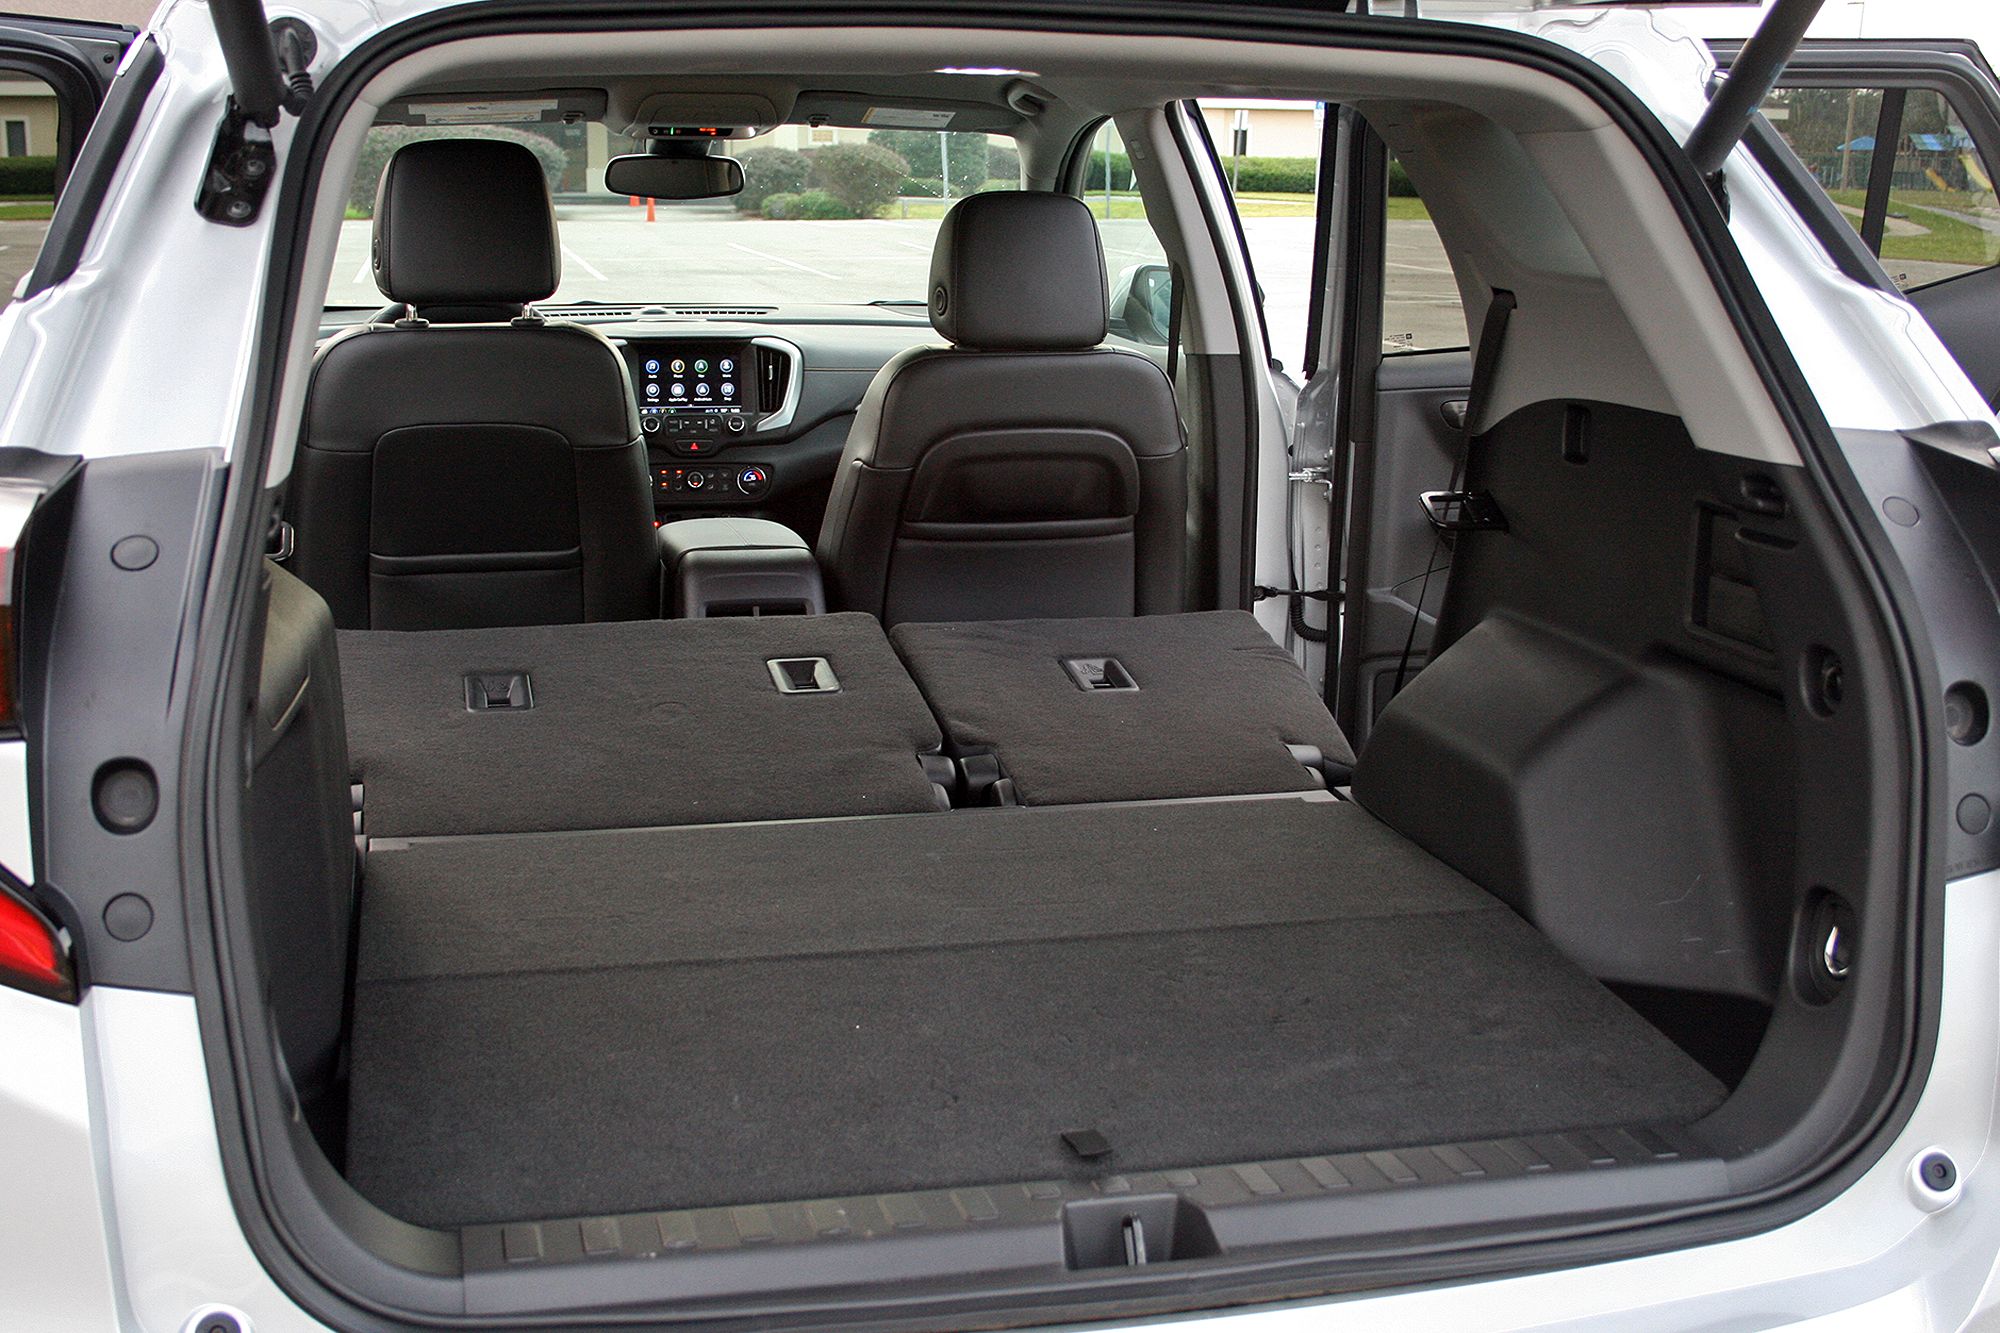 3 cubic feet of room with seats folded